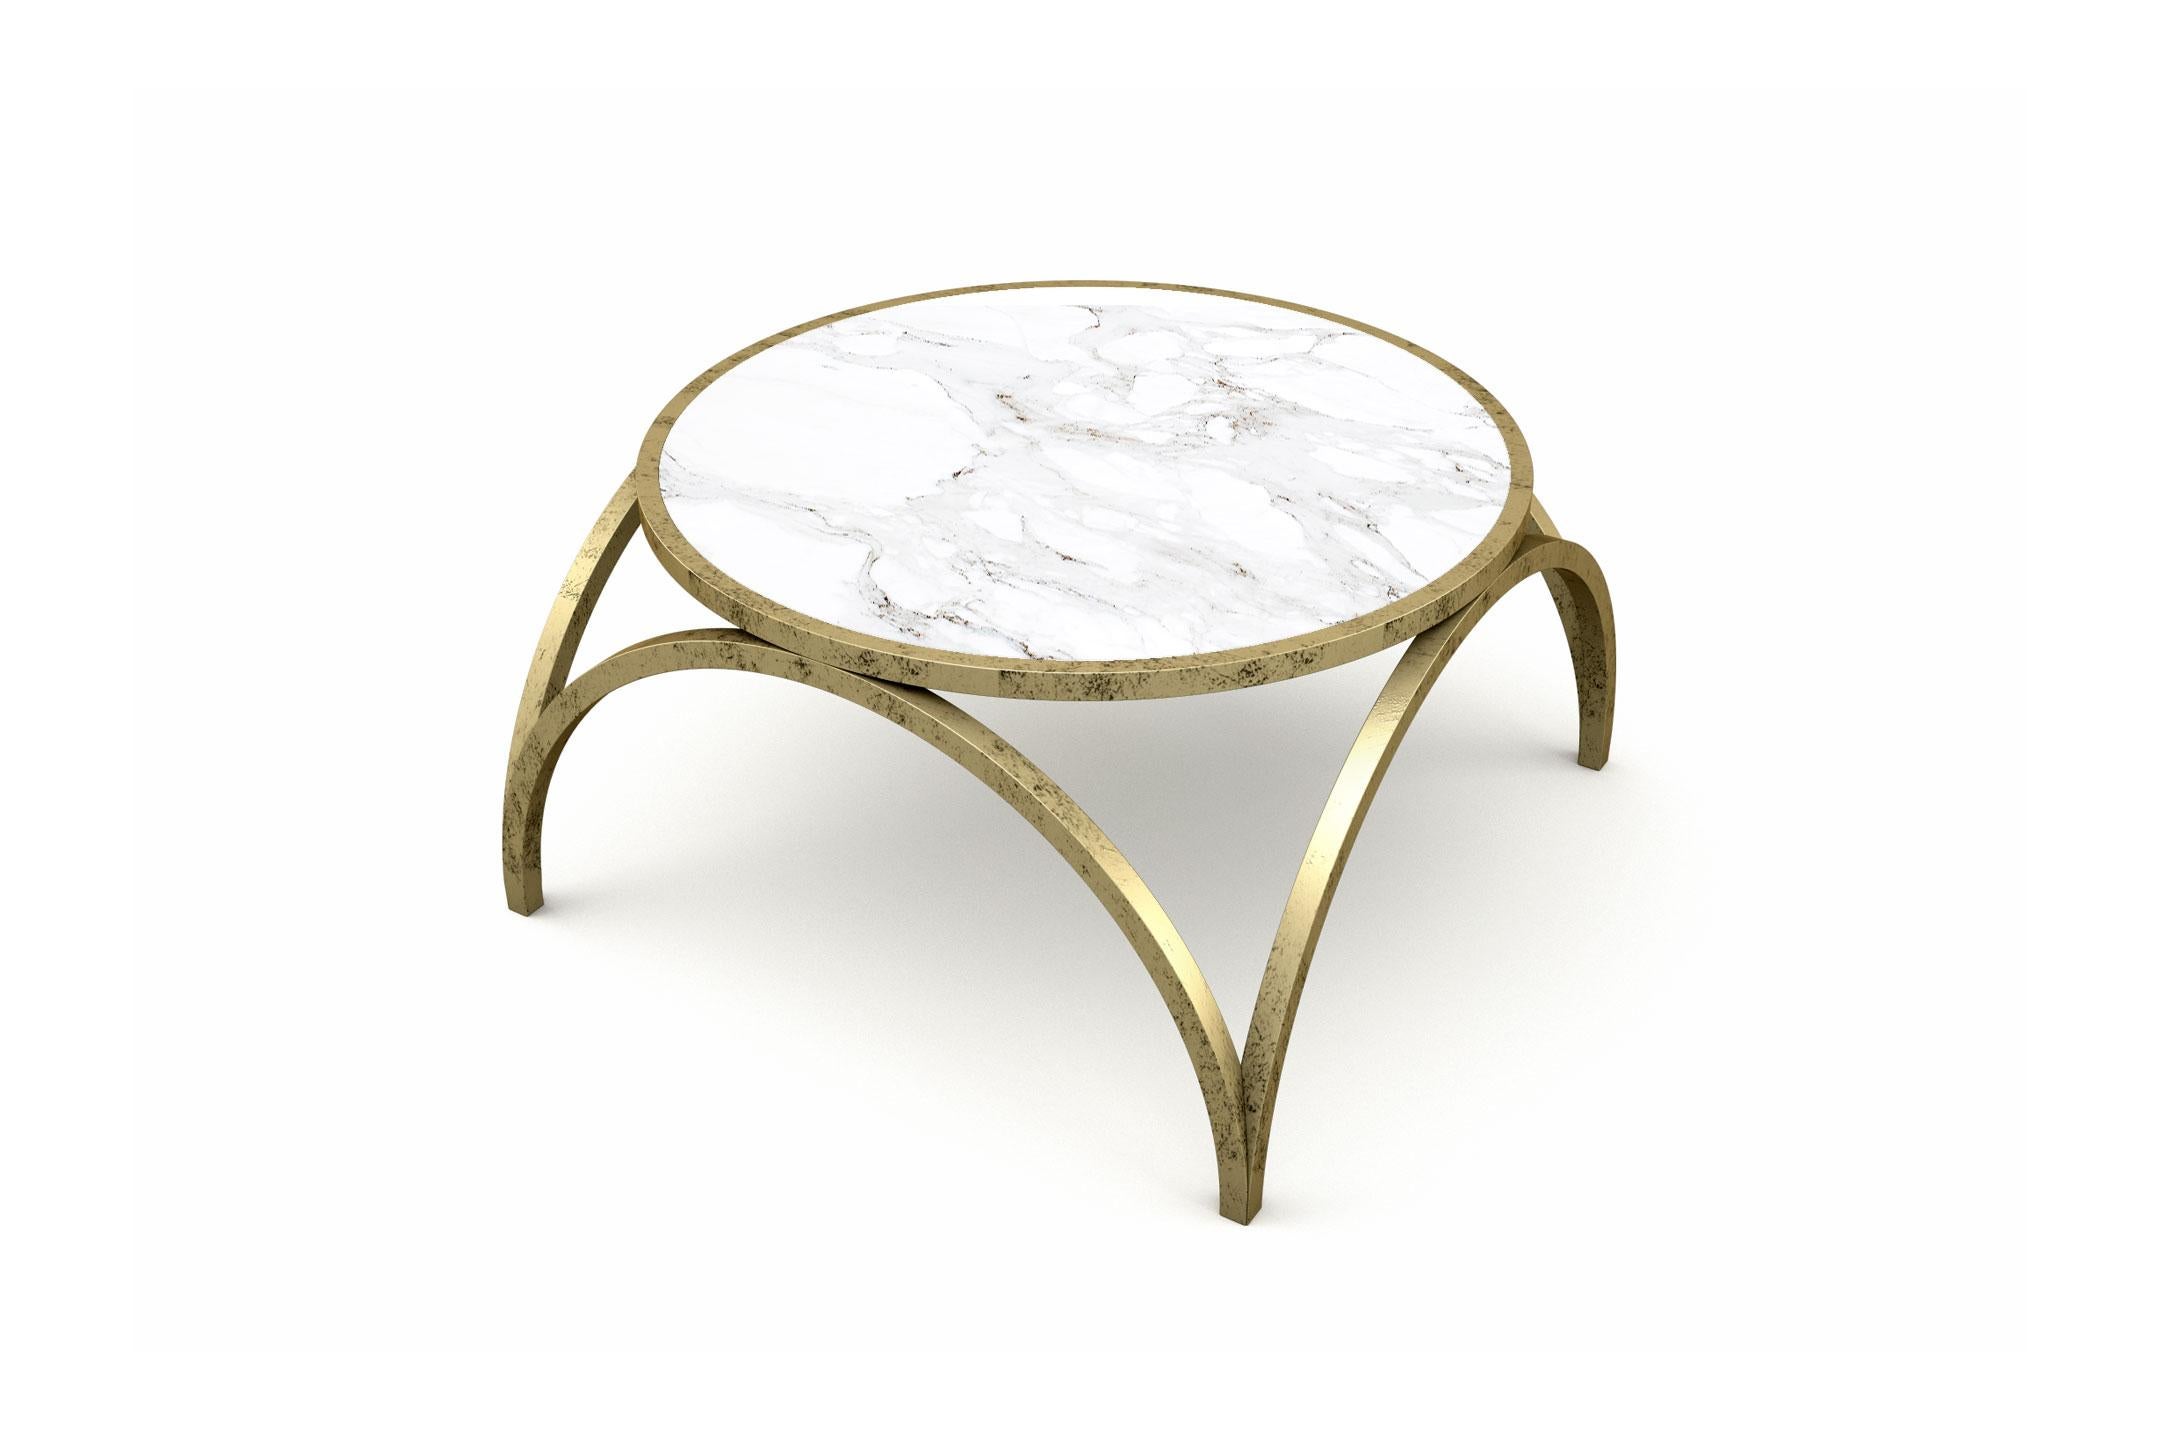 Crescent Large Coffee Table - Modern Brass Coffee Table In New Condition For Sale In London, GB